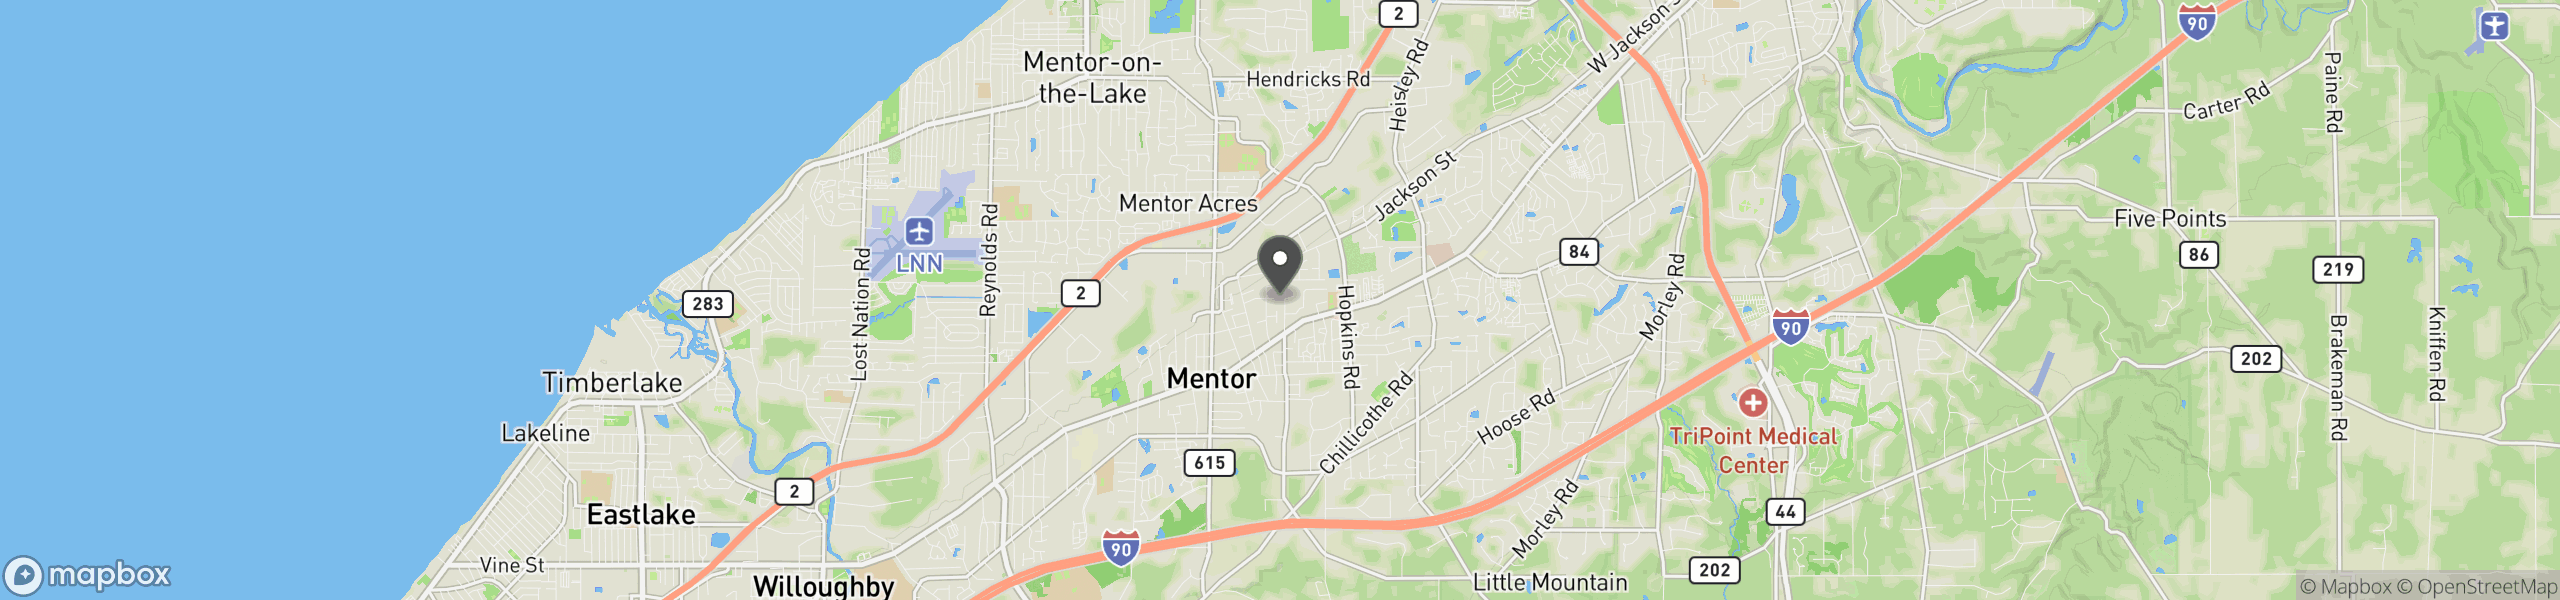 Mentor, OH 44060